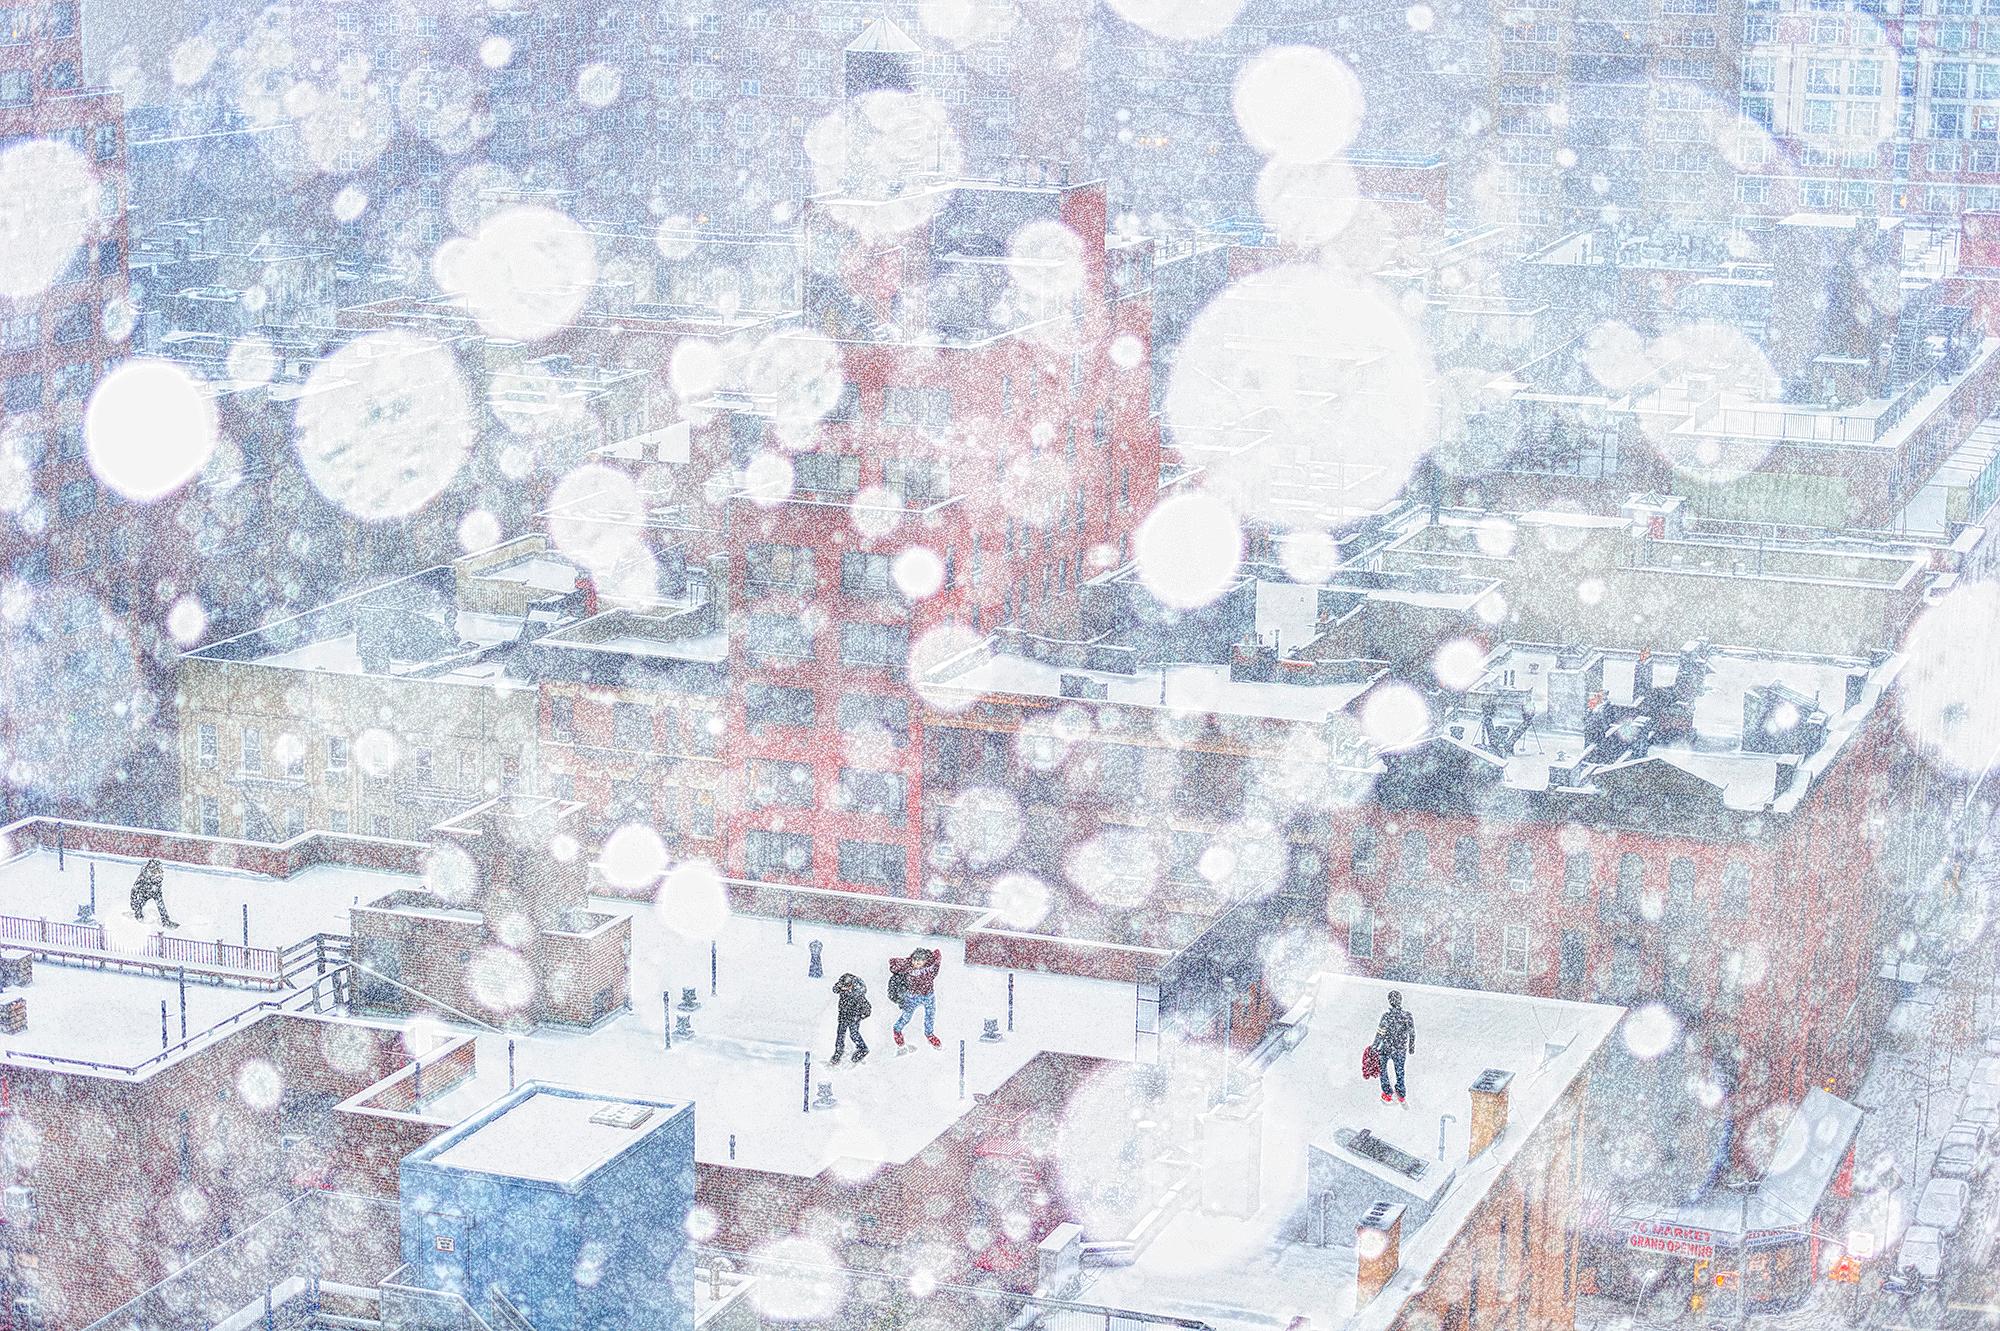 Mitchell Funk Abstract Photograph - Ethereal Snowy Rooftops, New York City